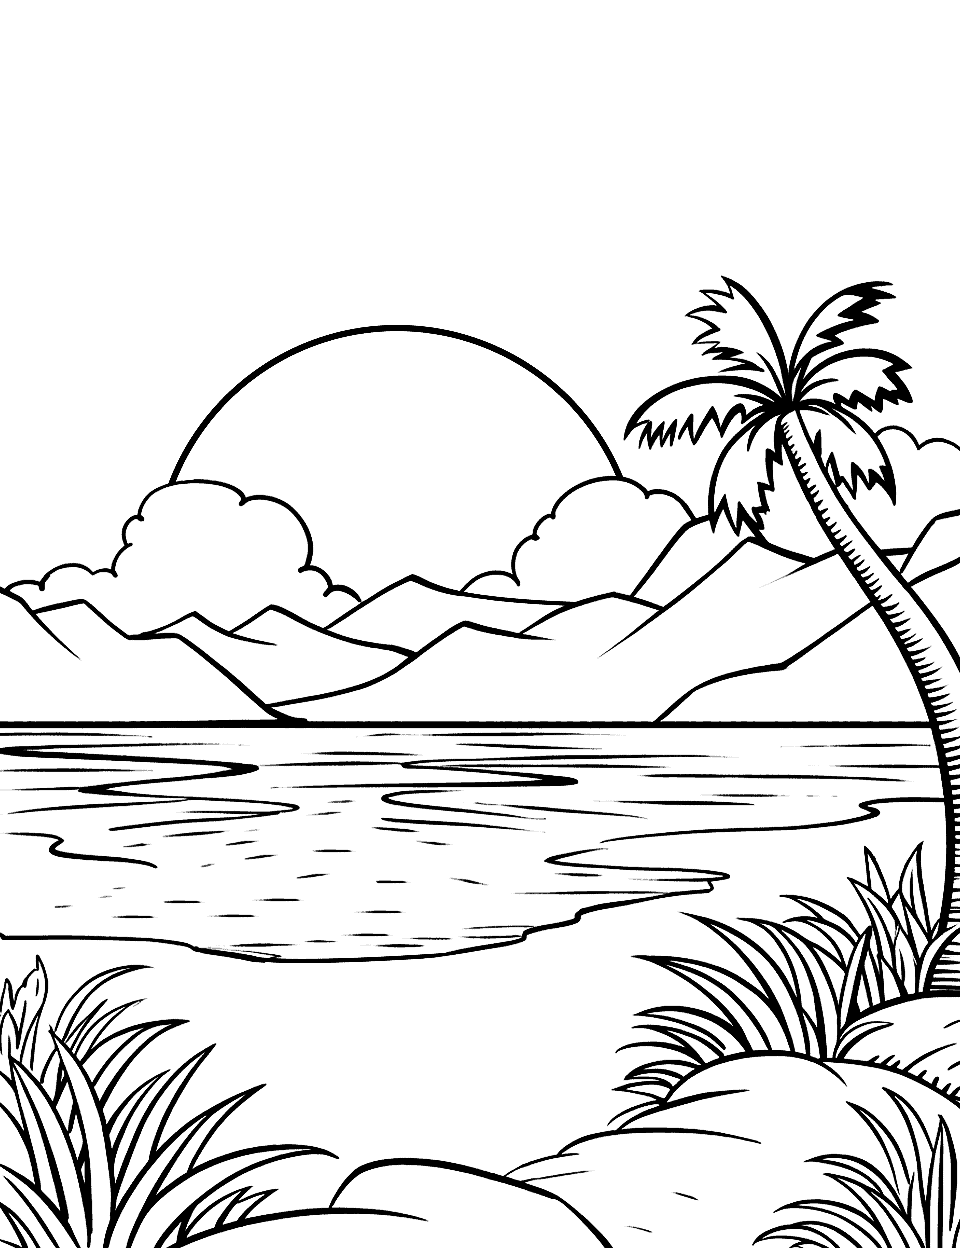 Sunset at the Island Shore Nature Coloring Page - A breathtaking sunset view at a secluded island beach with palm trees.